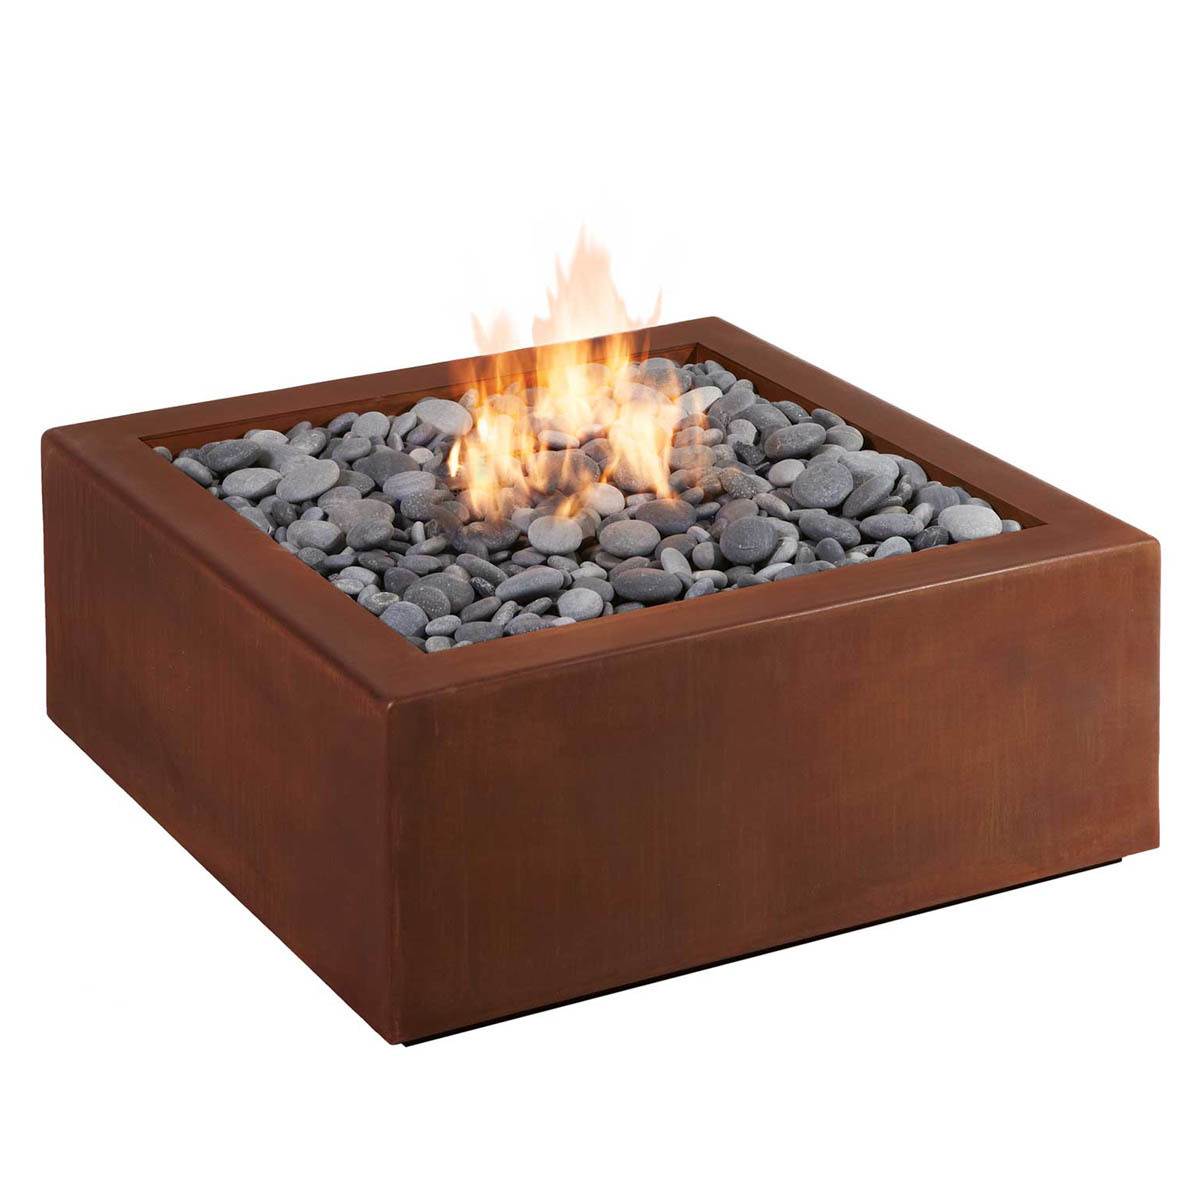 Bento Square Outdoor Fire Pit In Corten, Coal Outdoor Fire Pit